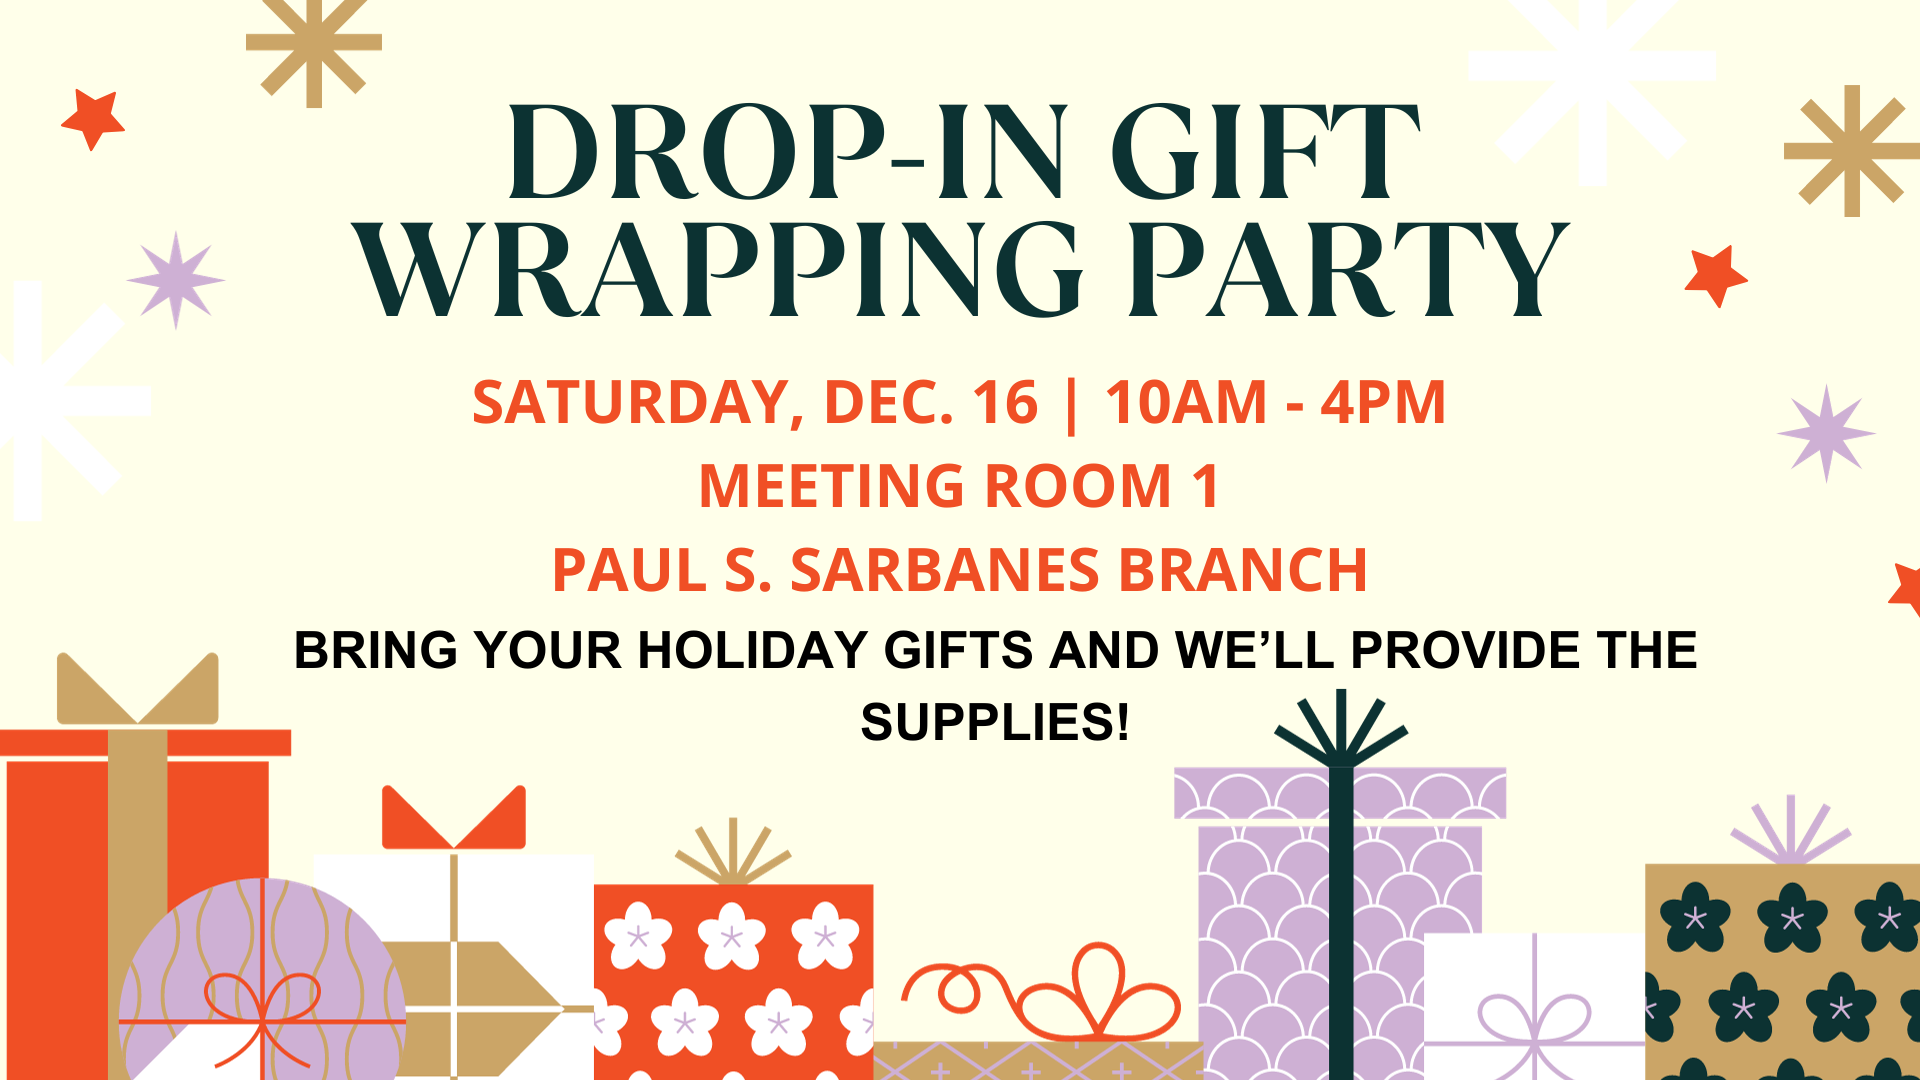 Drop-In Gift Wrapping Party